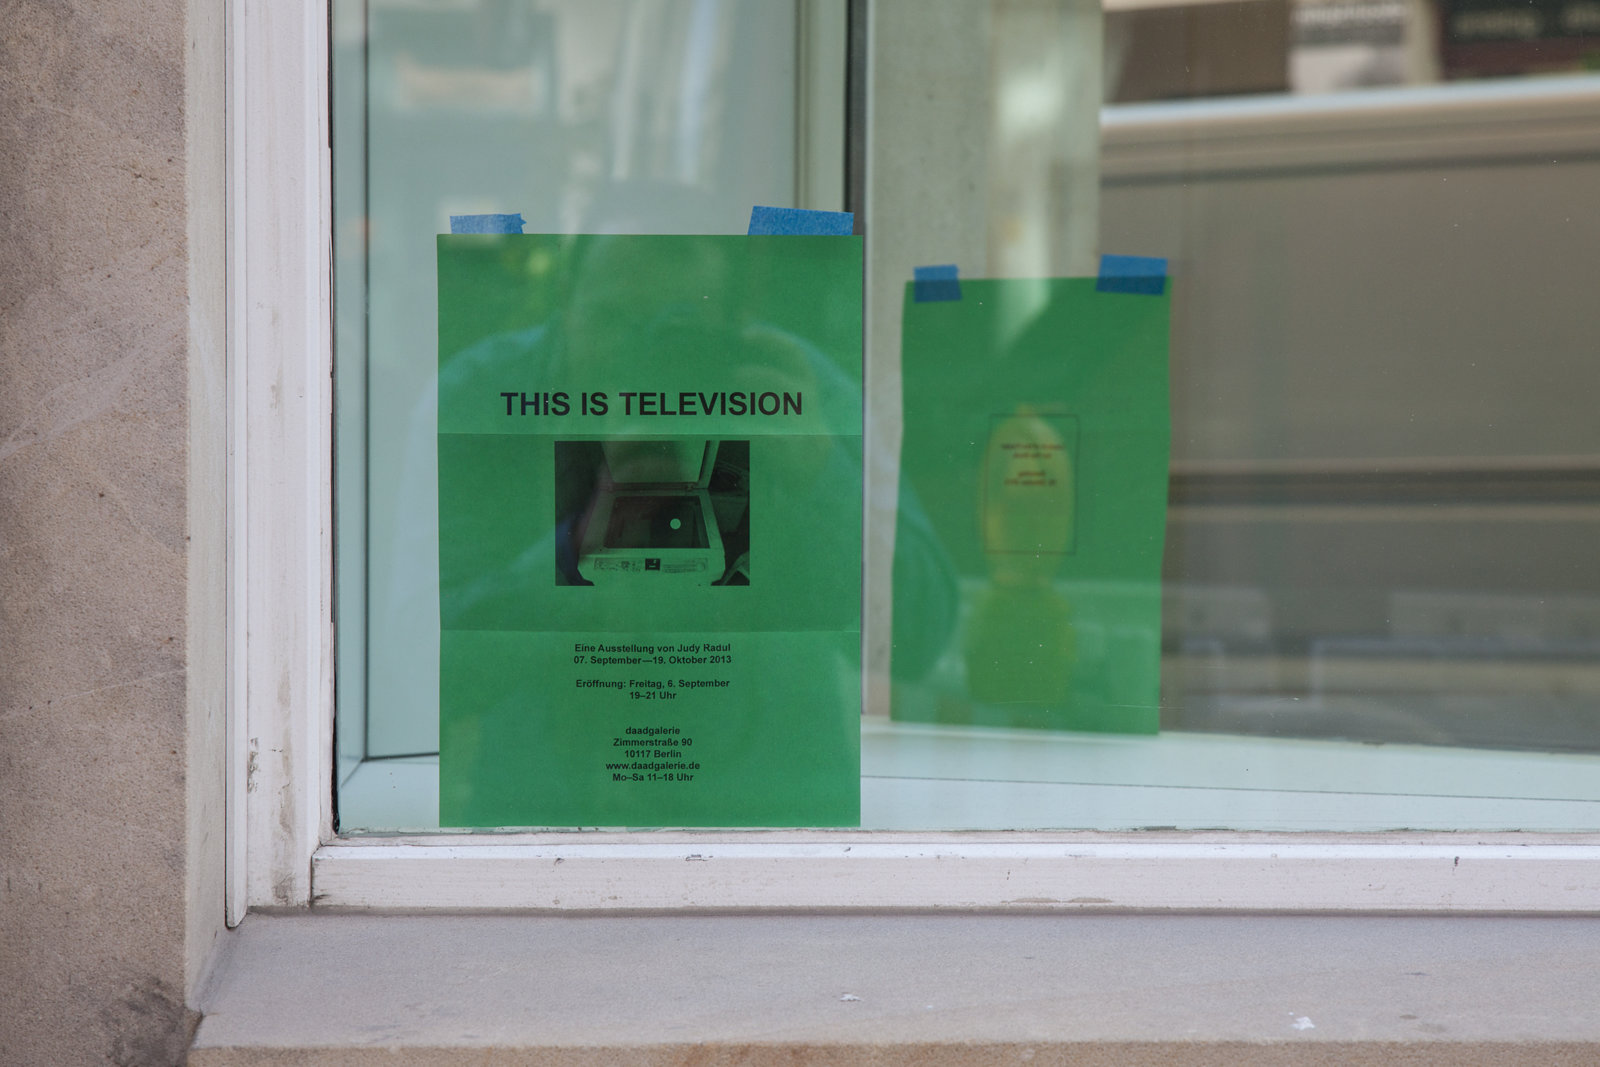 Judy Radul, EXHIBITION INVITATION (detail), 2013, mirror, black and white photocopy on green paper, dimensions variable. Installation view, This is Television, Daadgalerie, Berlin, Germany, 2013